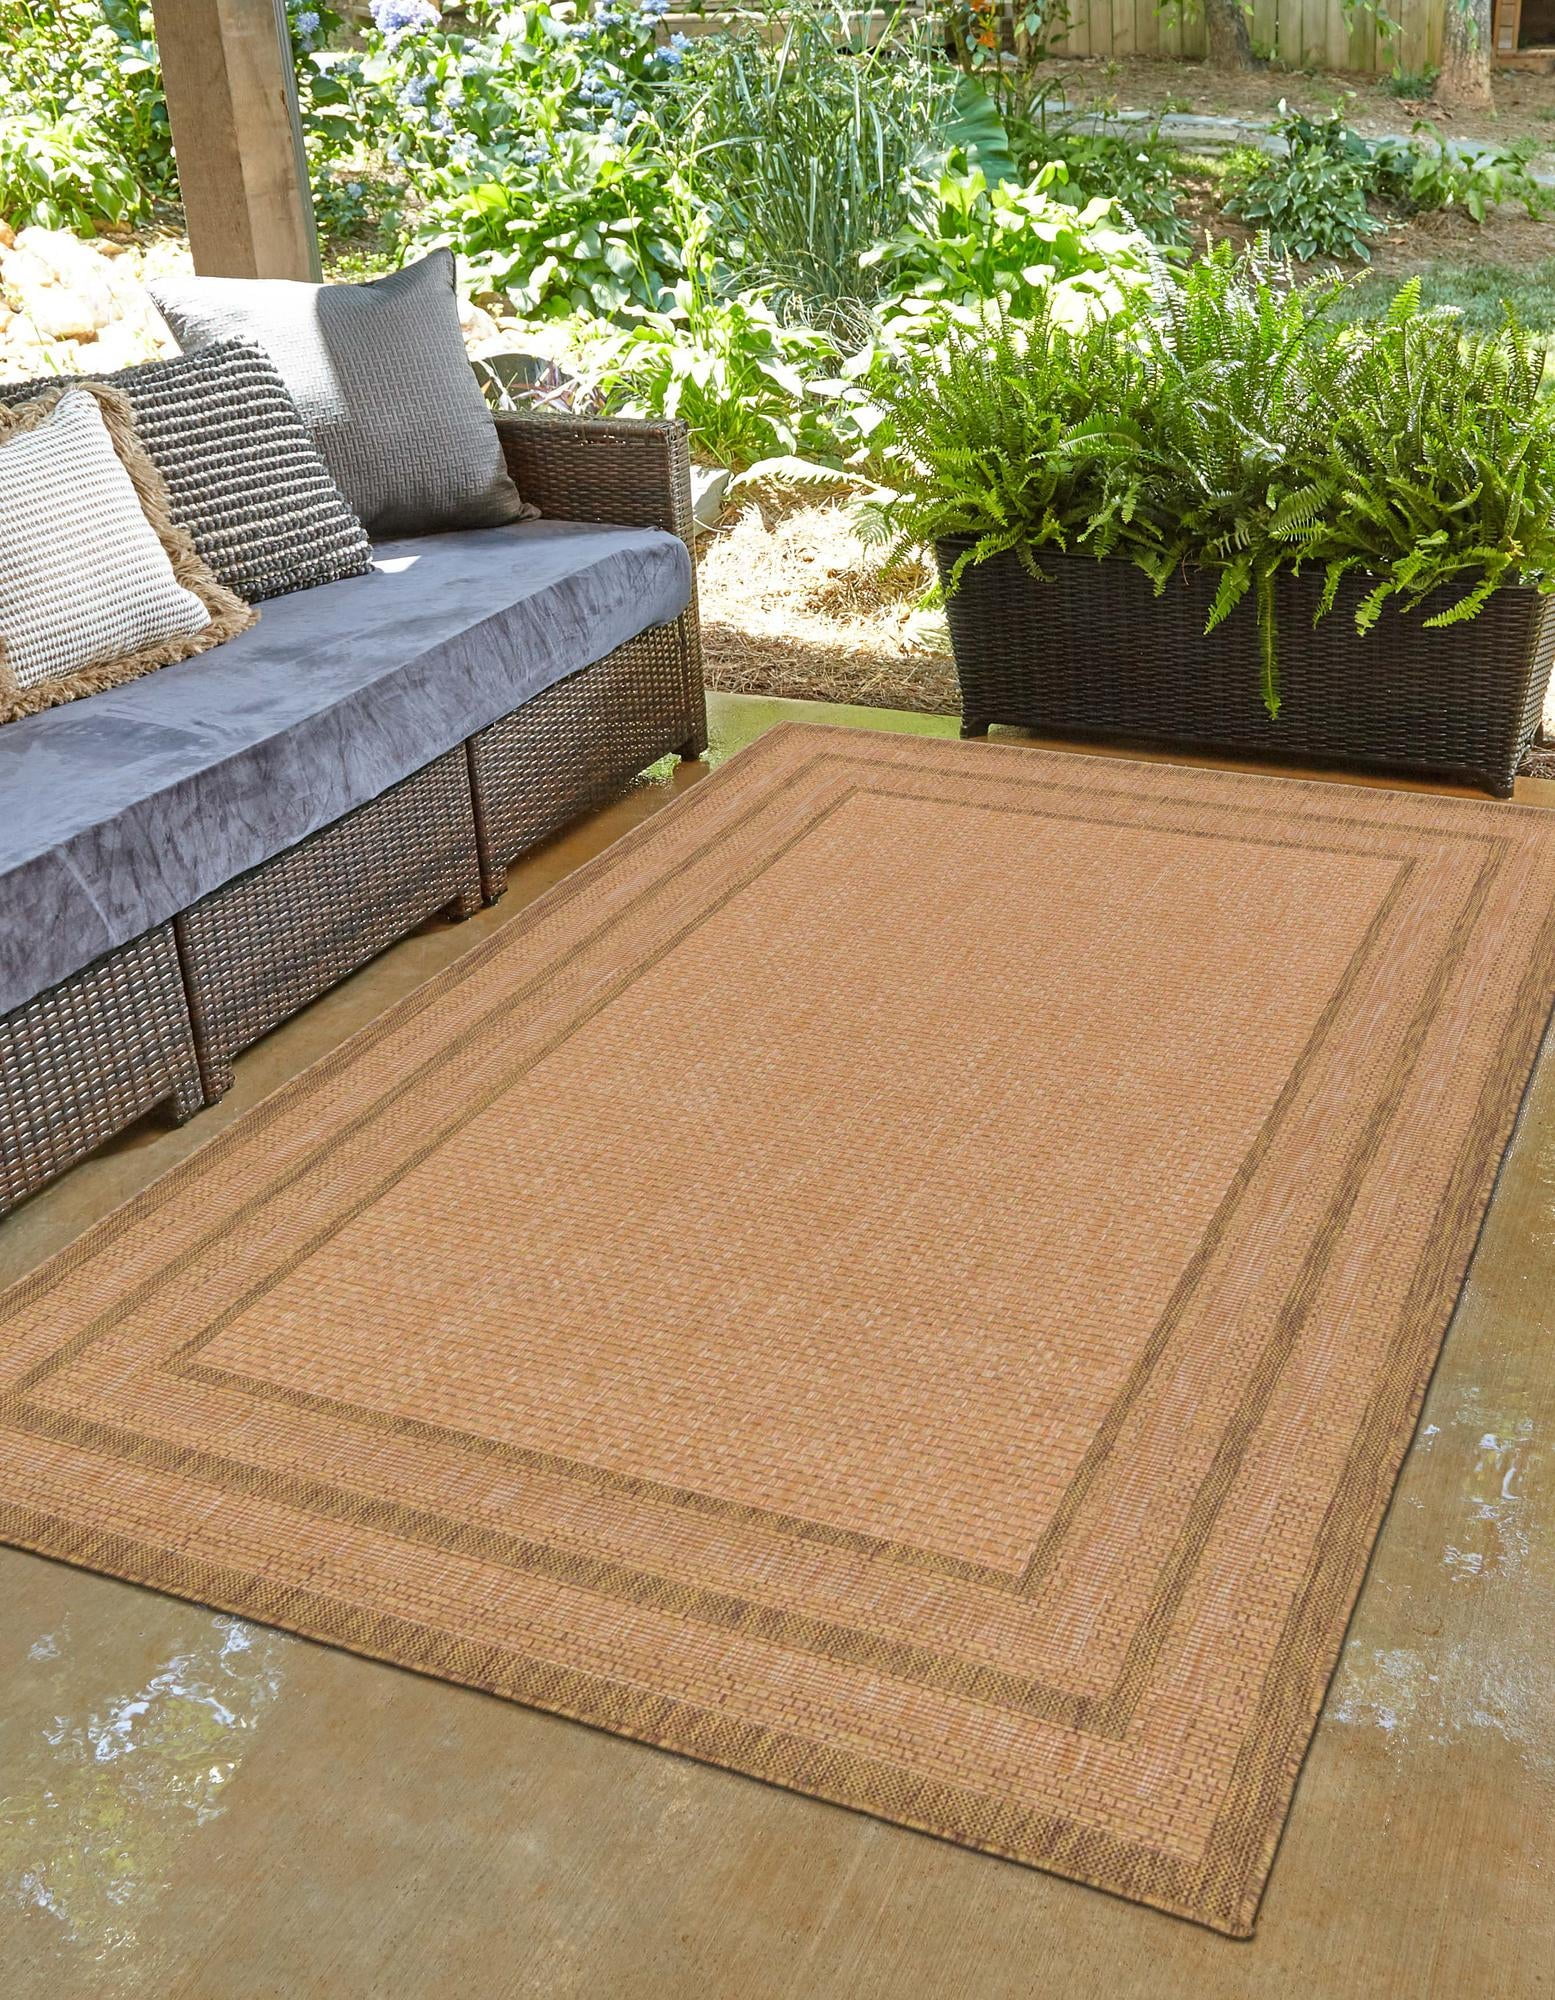 VEVOR Dark Brown Marine Carpet 6 ft x 18 ft Waterproof Patio Rug Marine Grade Carpet for Boats with Waterproof Back Outdoor Rug for Patio Porch Deck